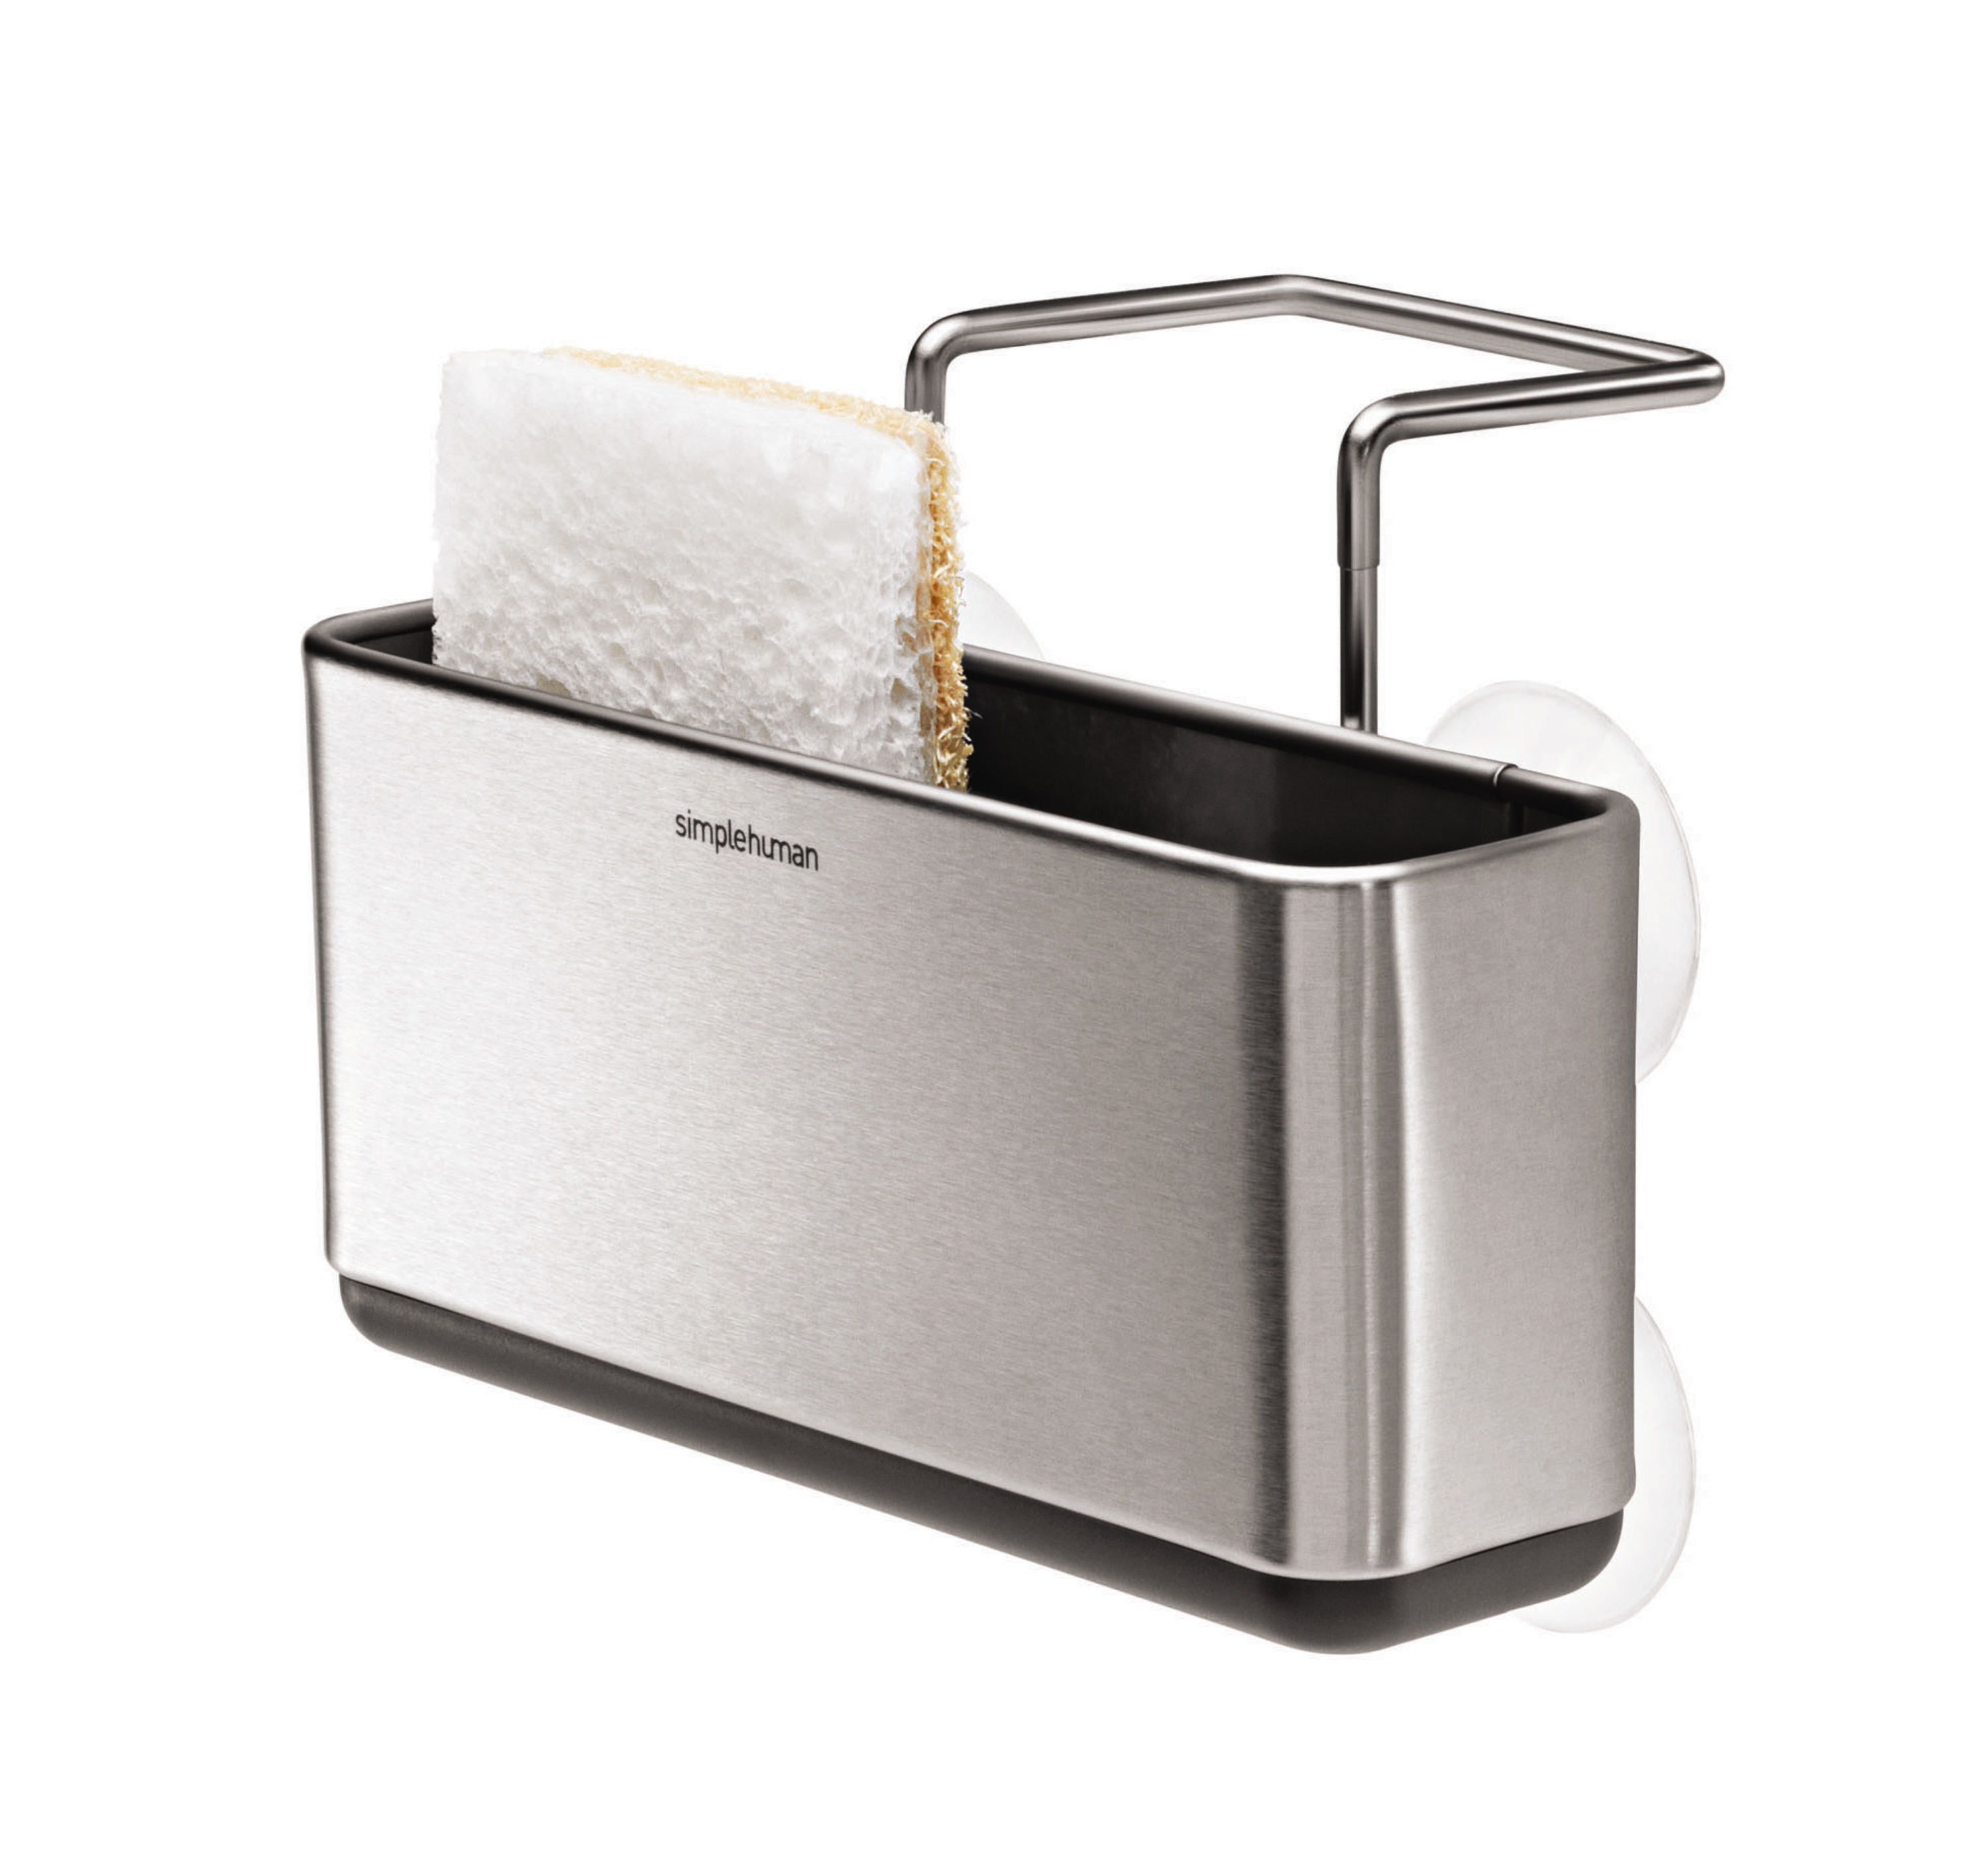 simplehuman Slim Sink Caddy, Brushed Stainless Steel - image 3 of 4